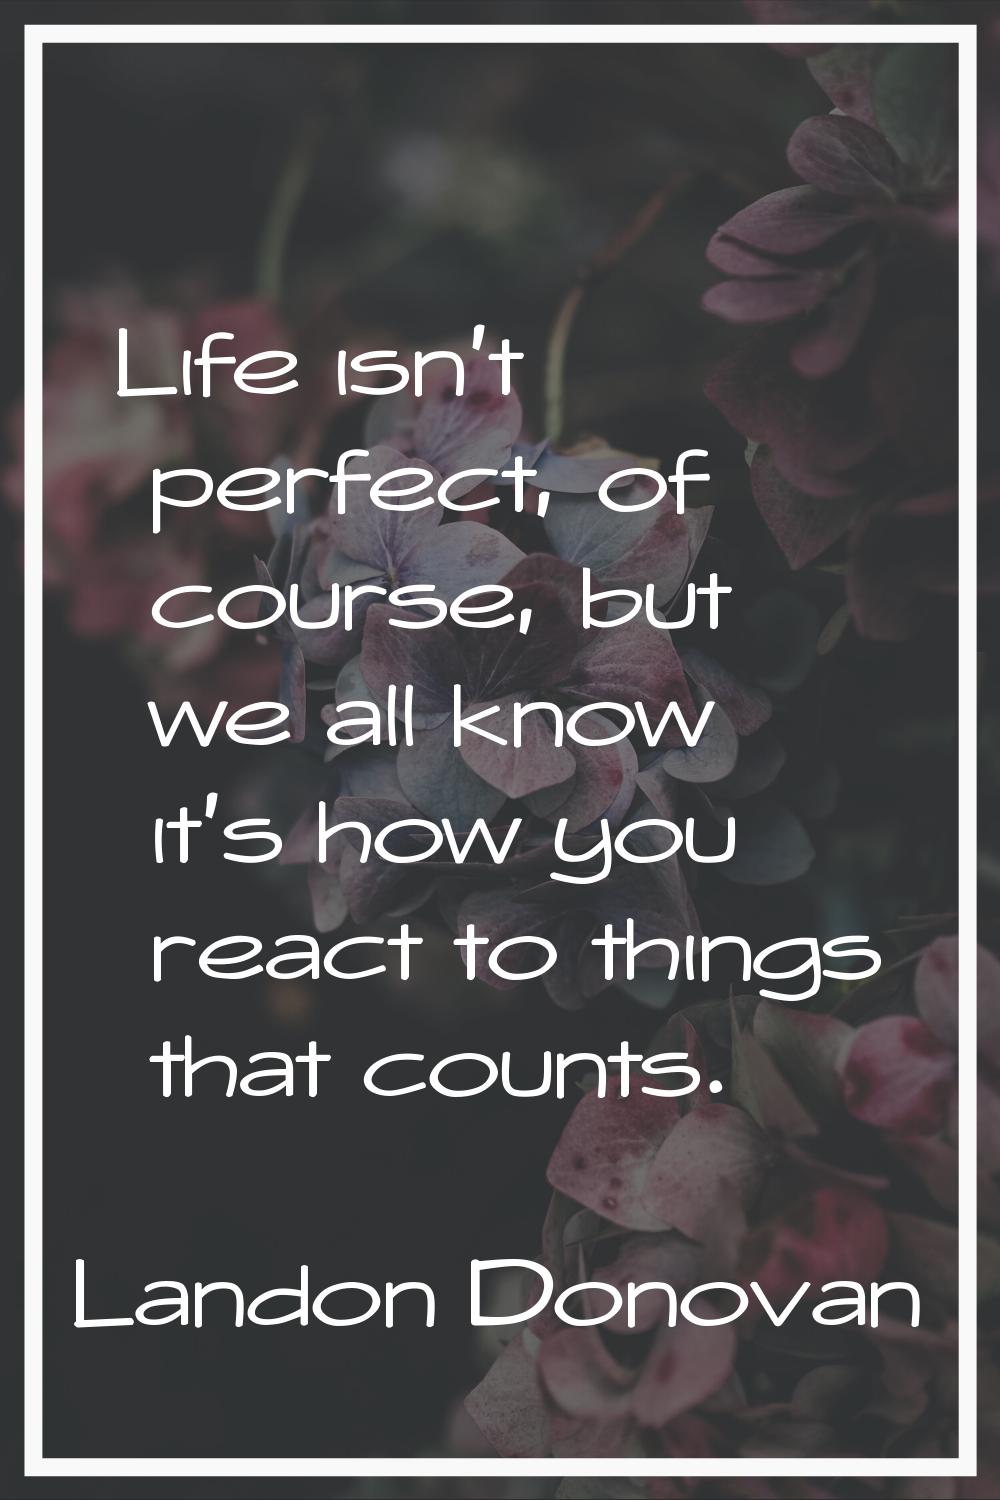 Life isn't perfect, of course, but we all know it's how you react to things that counts.